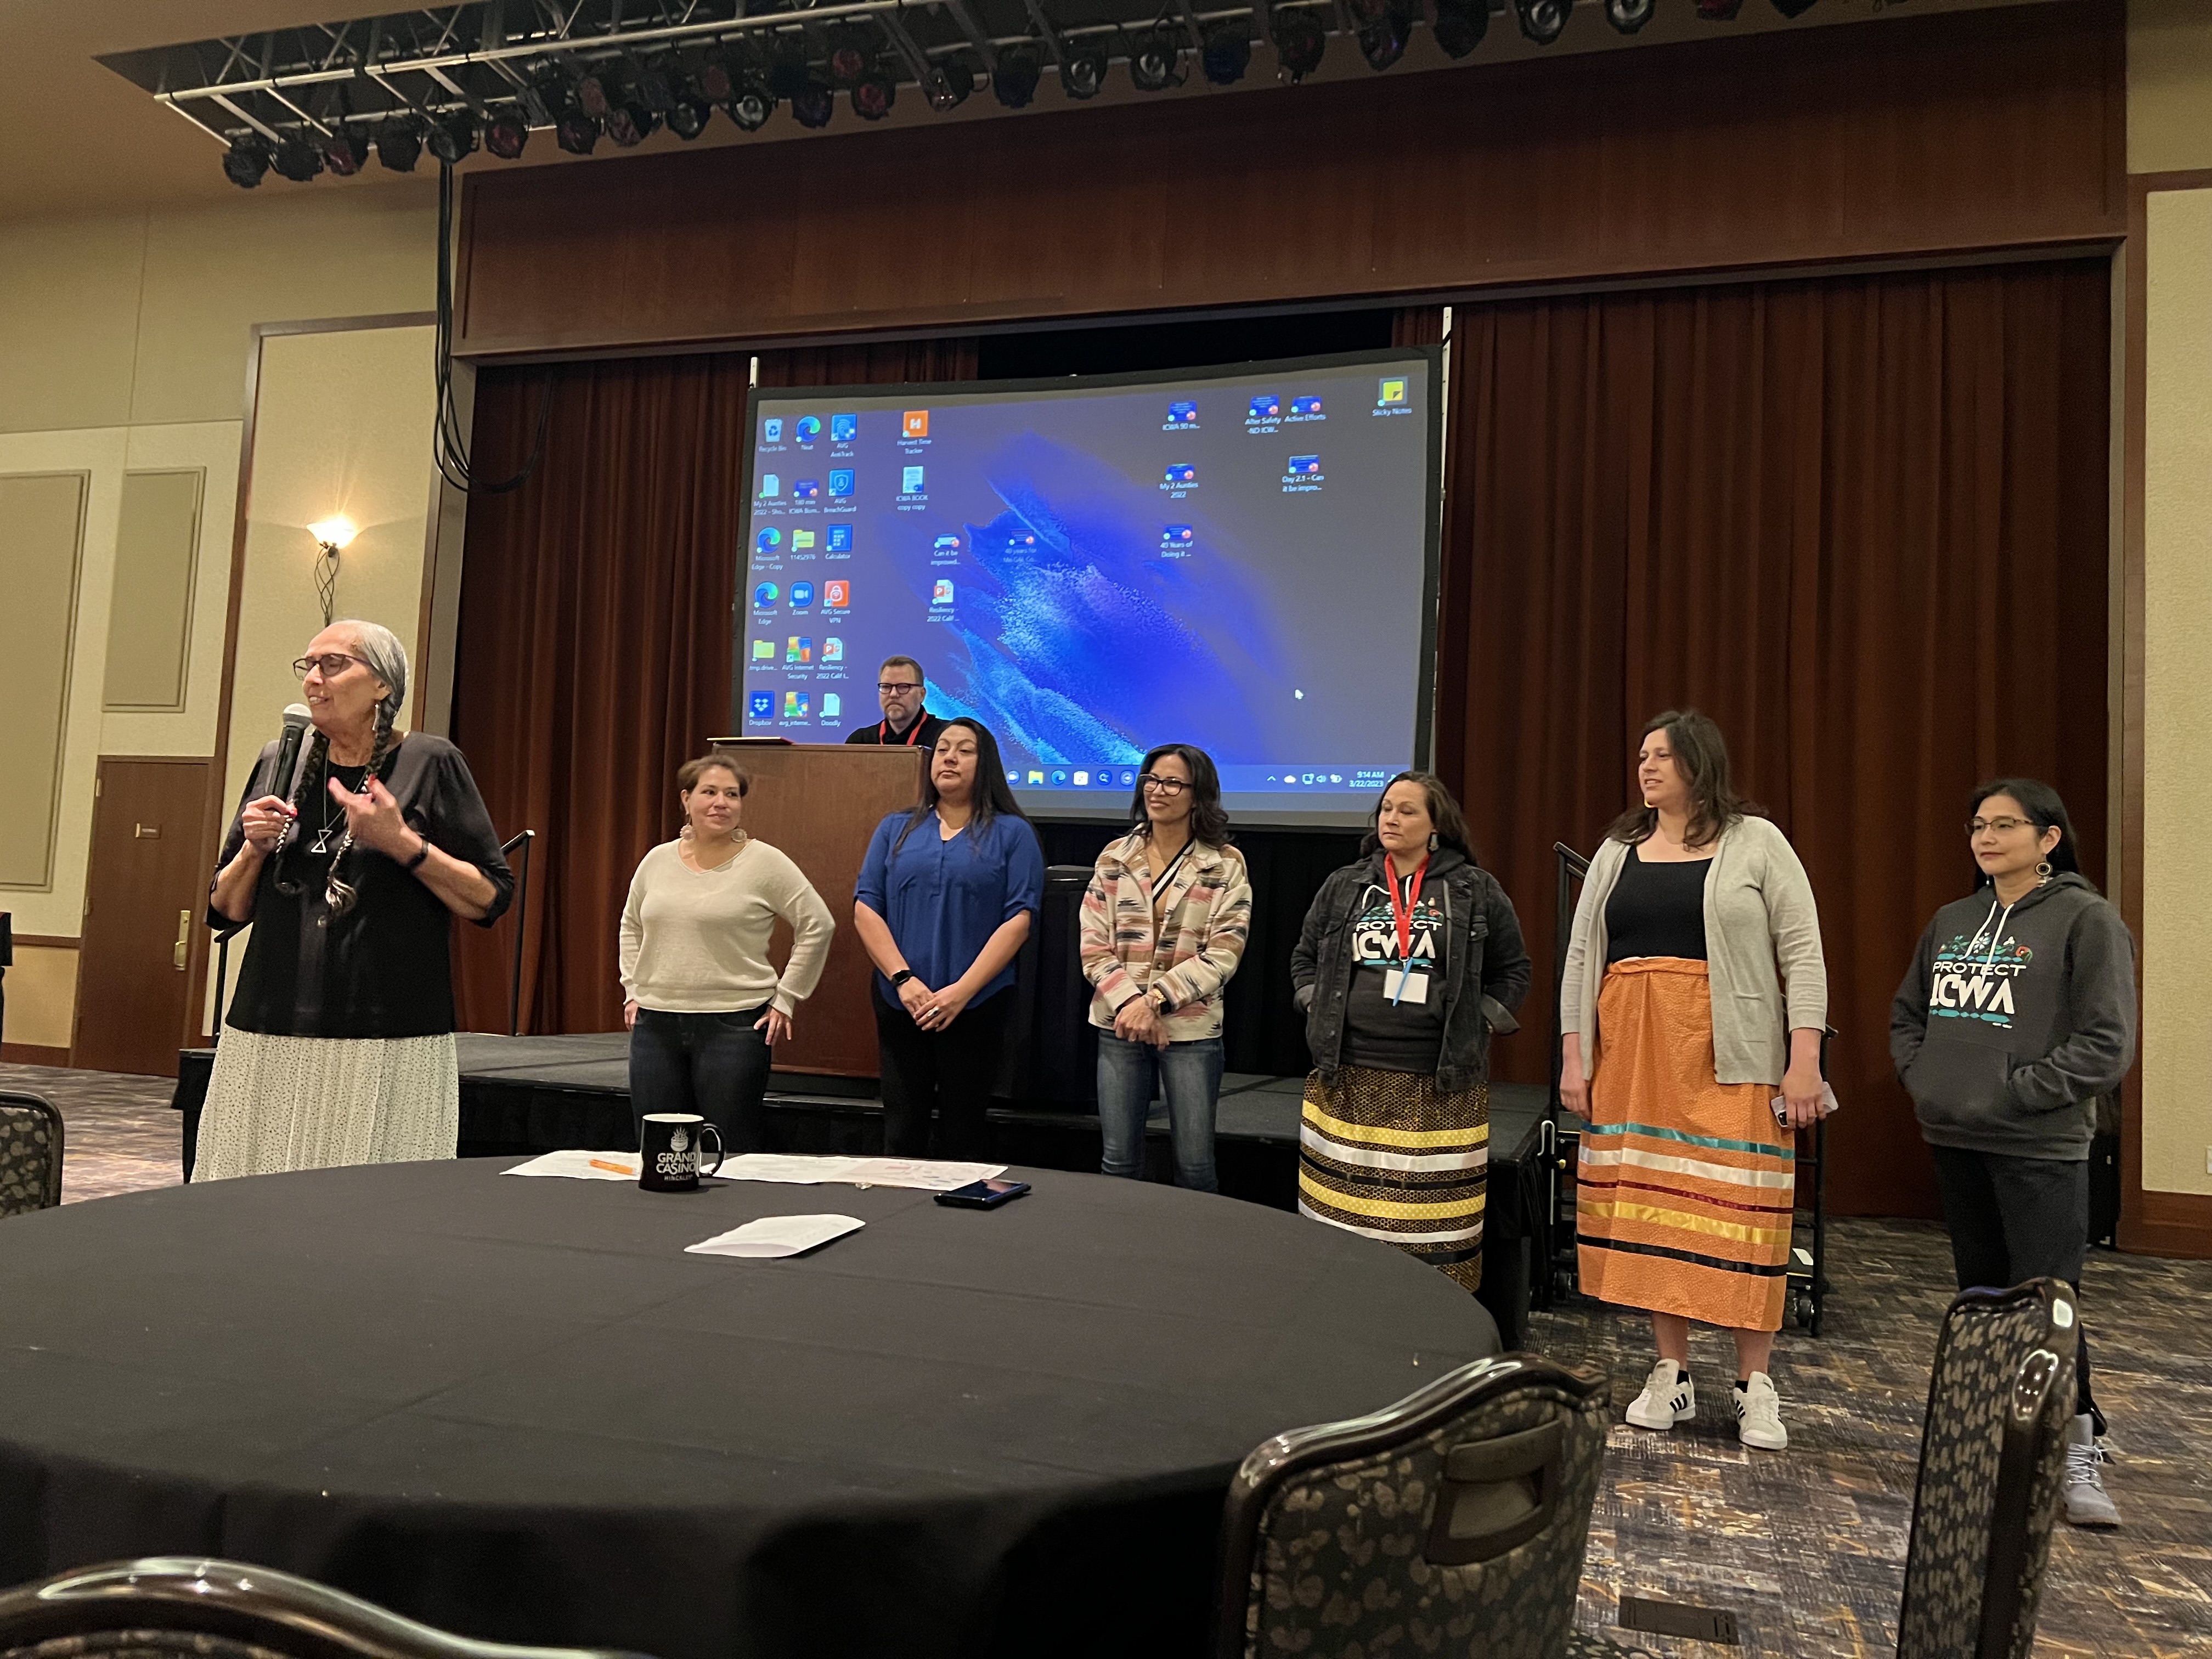 Participants at the annual ICWA Conference  standing together